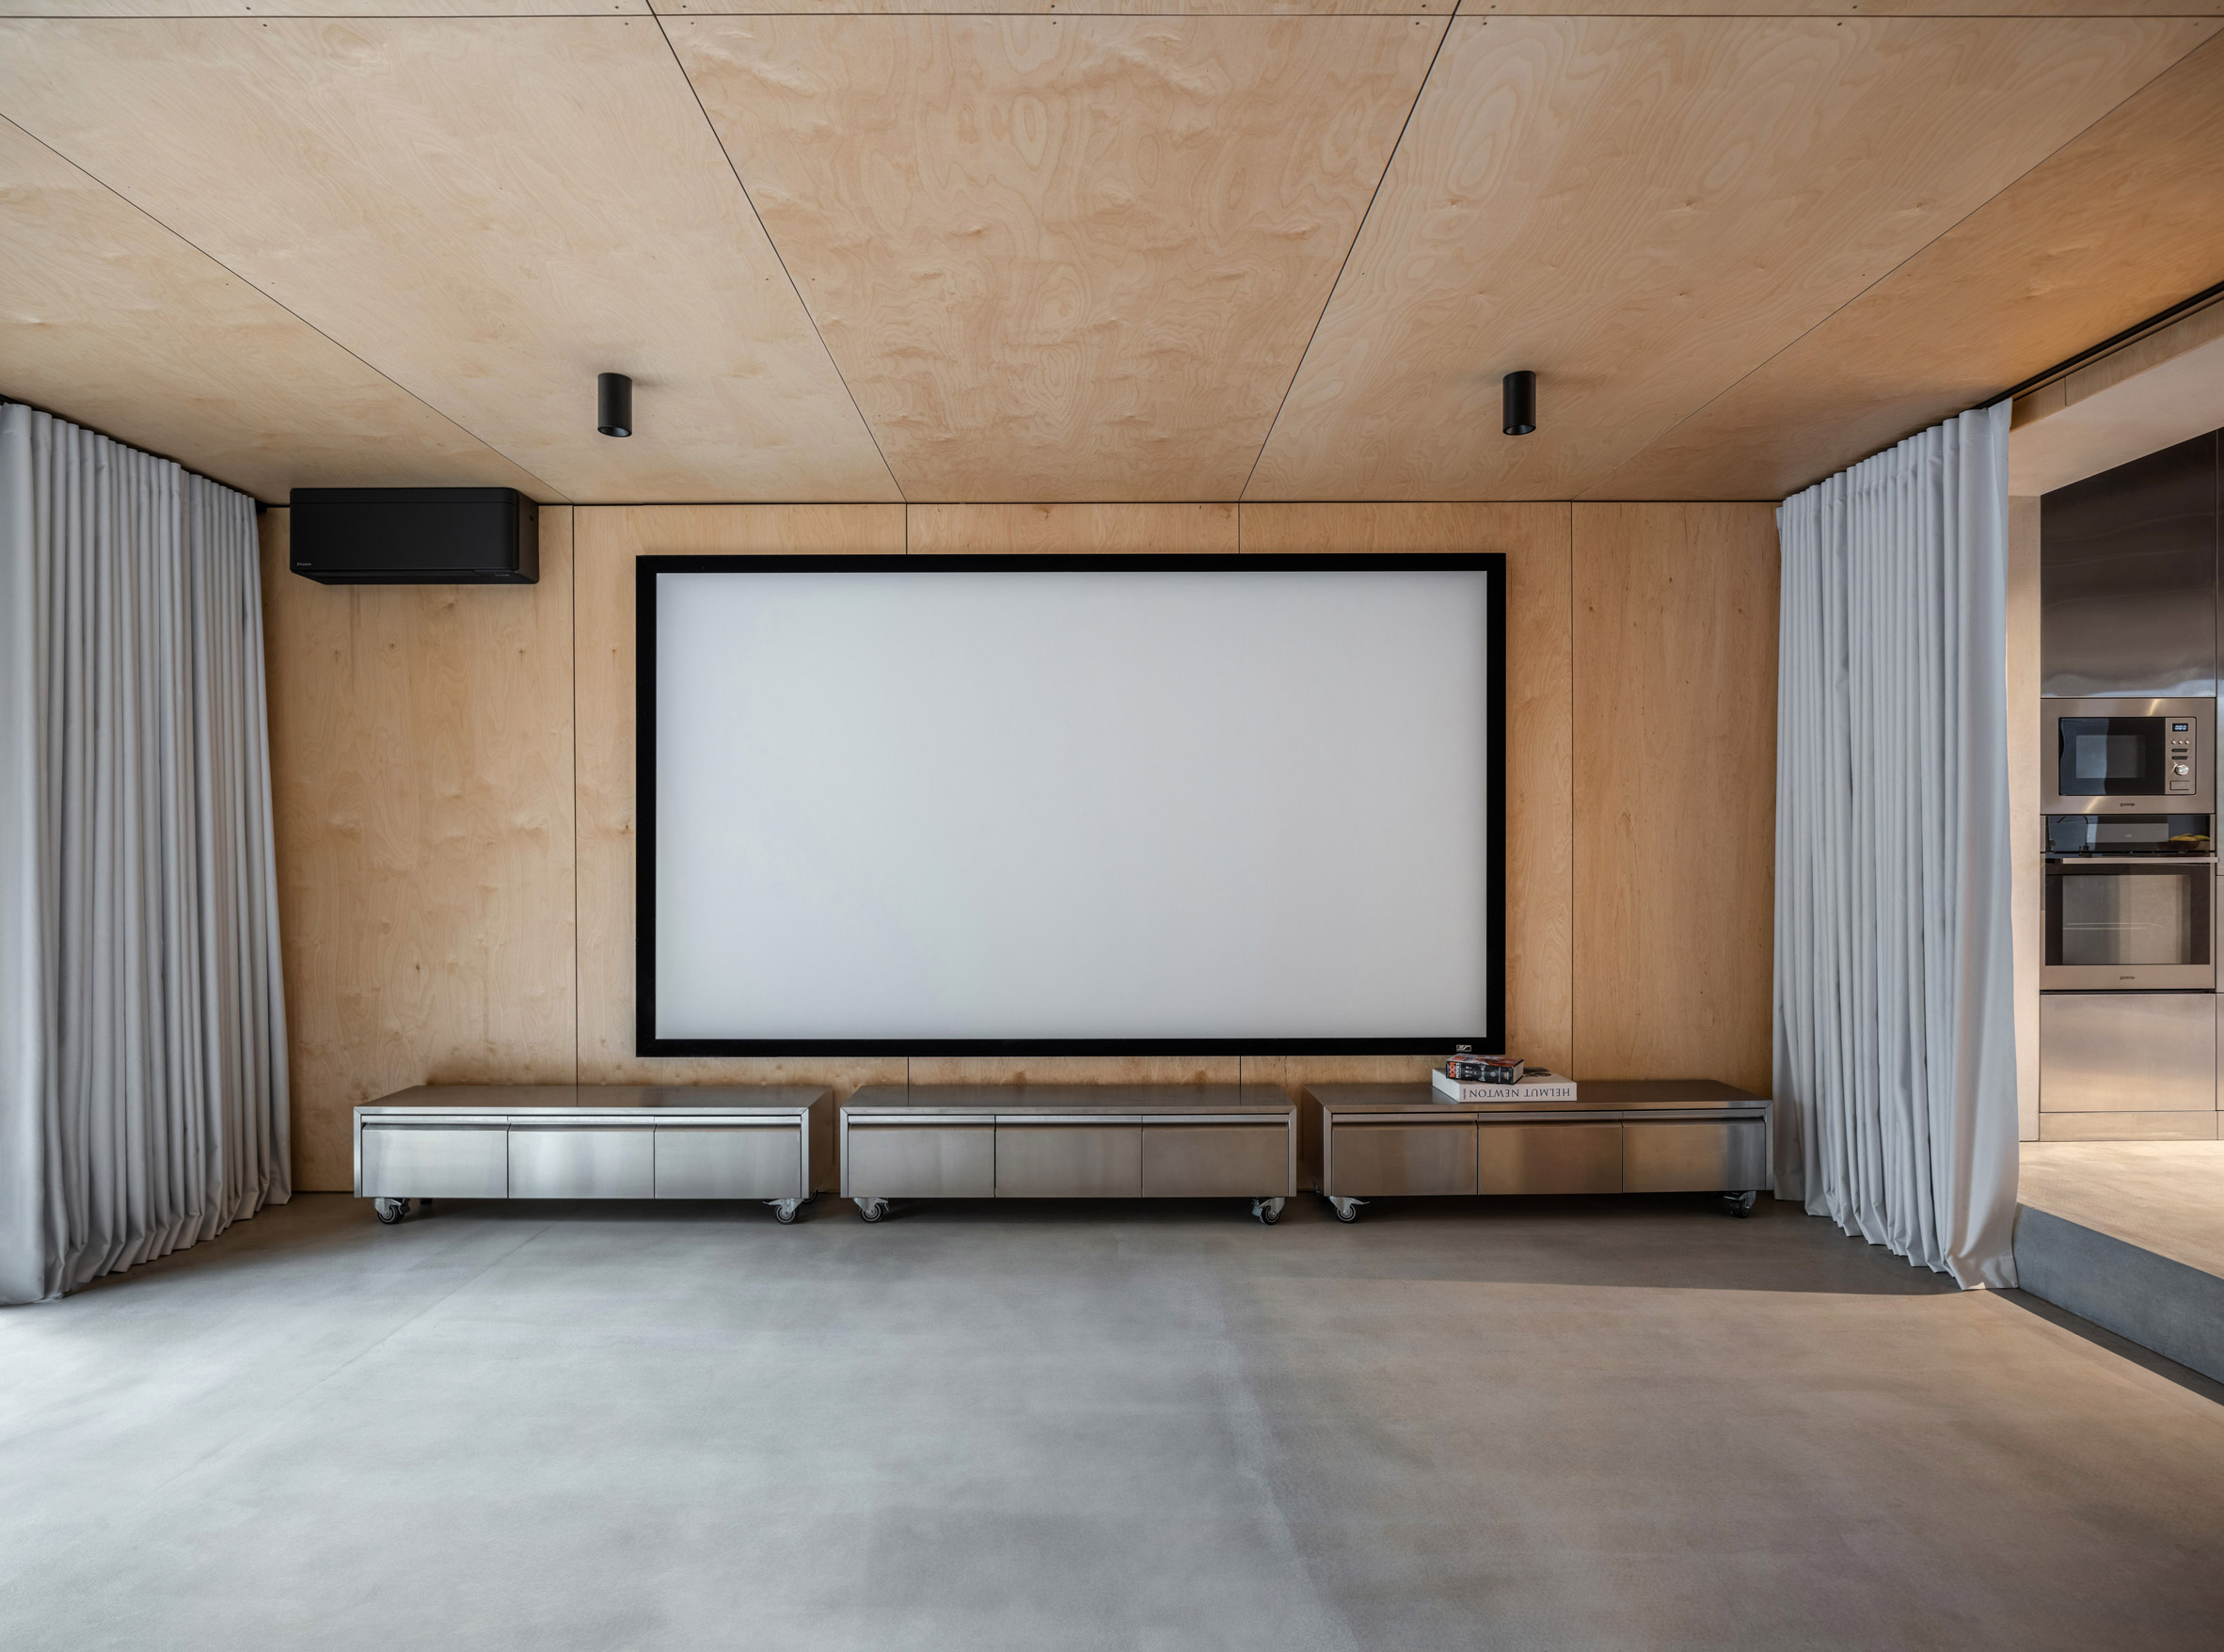 Photograph of home theatre space